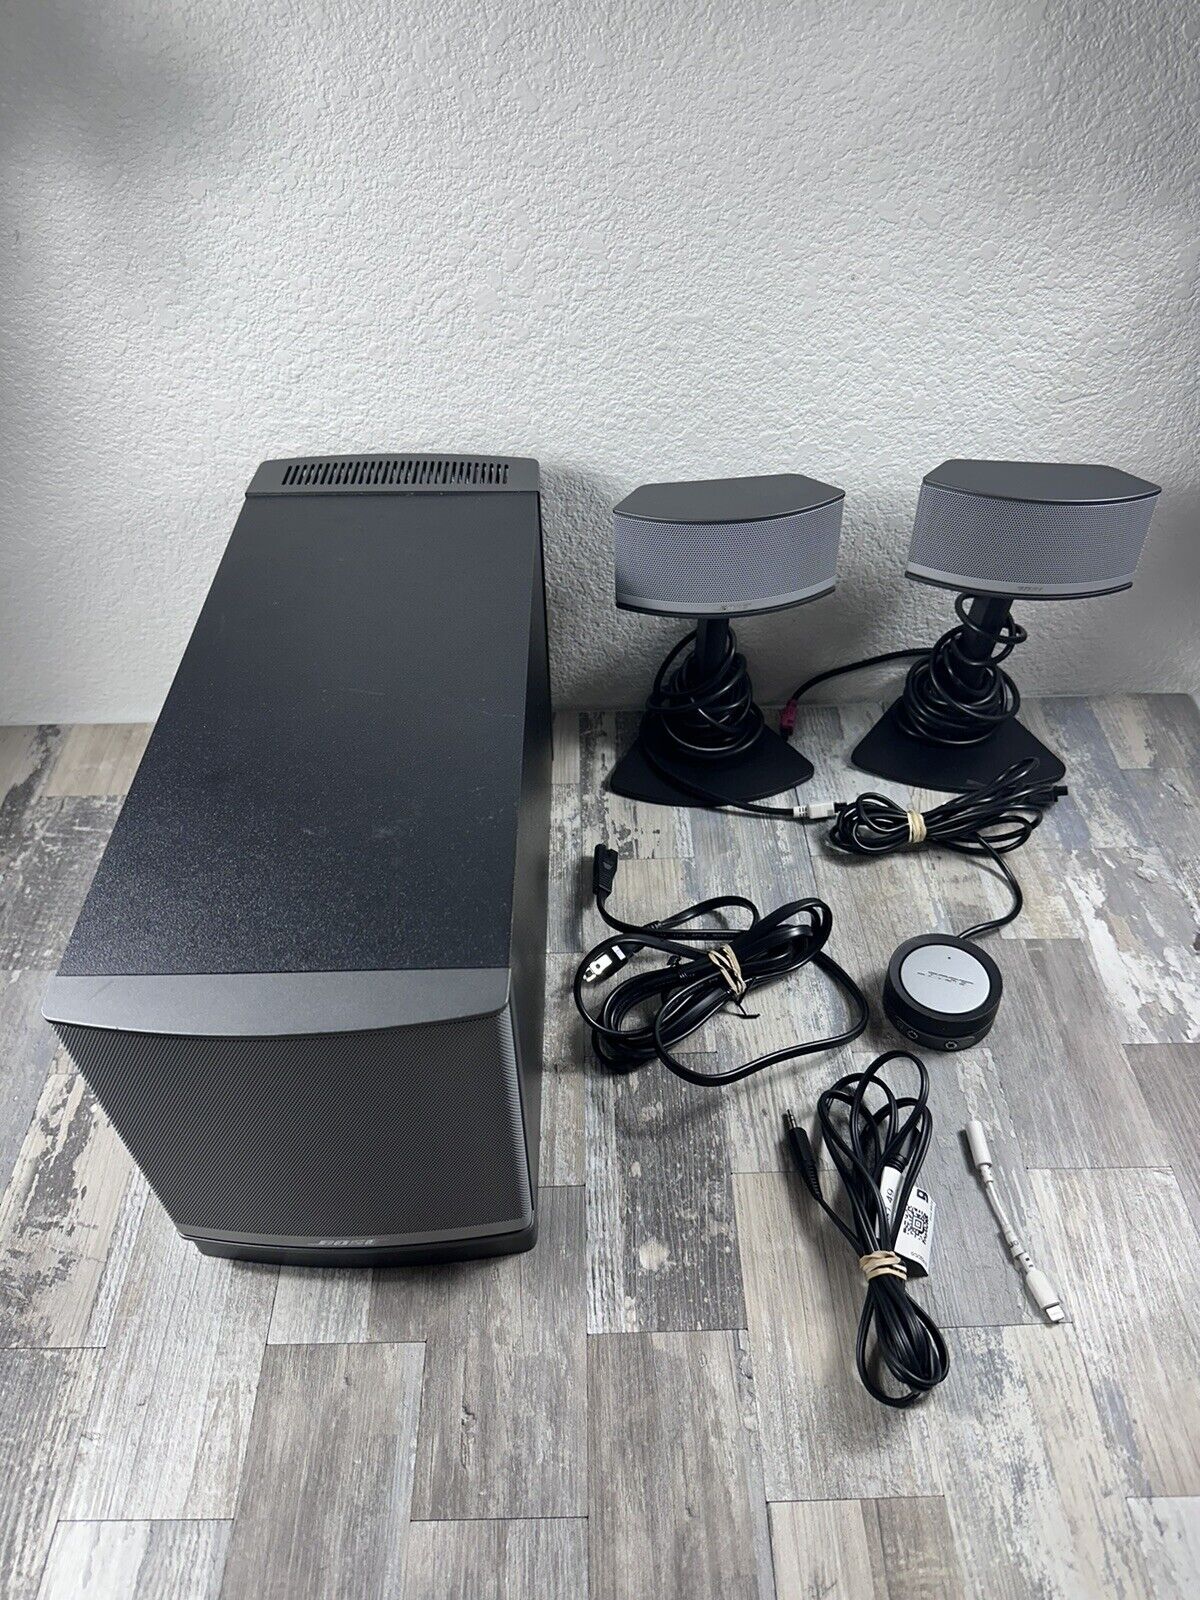 Bose Companion 5 Multimedia Speaker System Tested Sounds Great